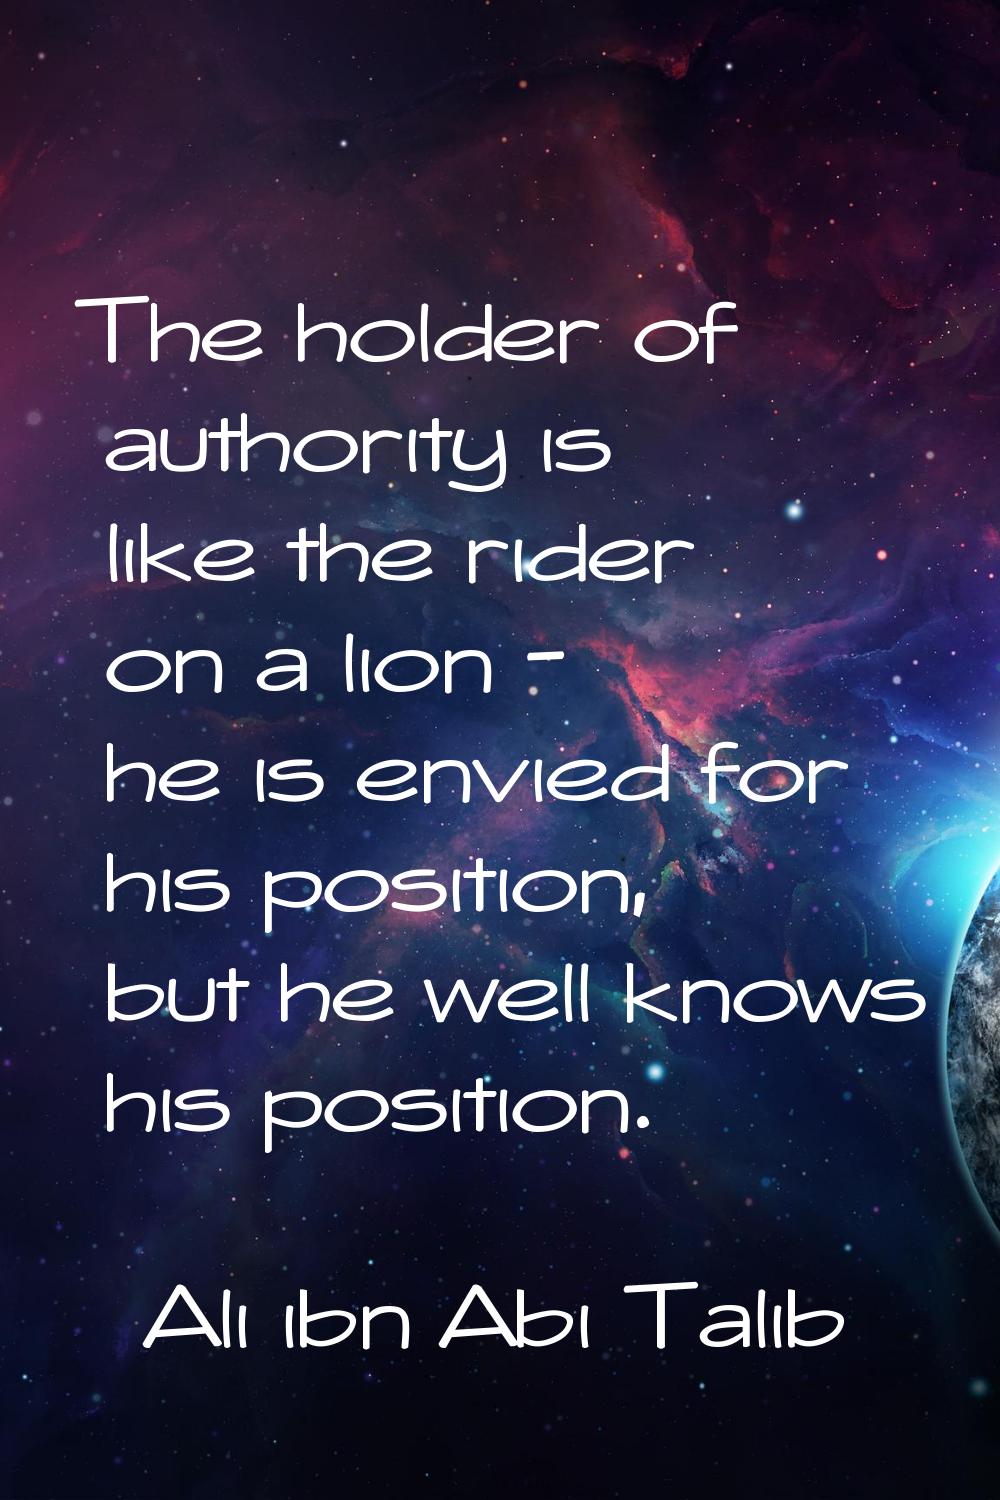 The holder of authority is like the rider on a lion - he is envied for his position, but he well kn